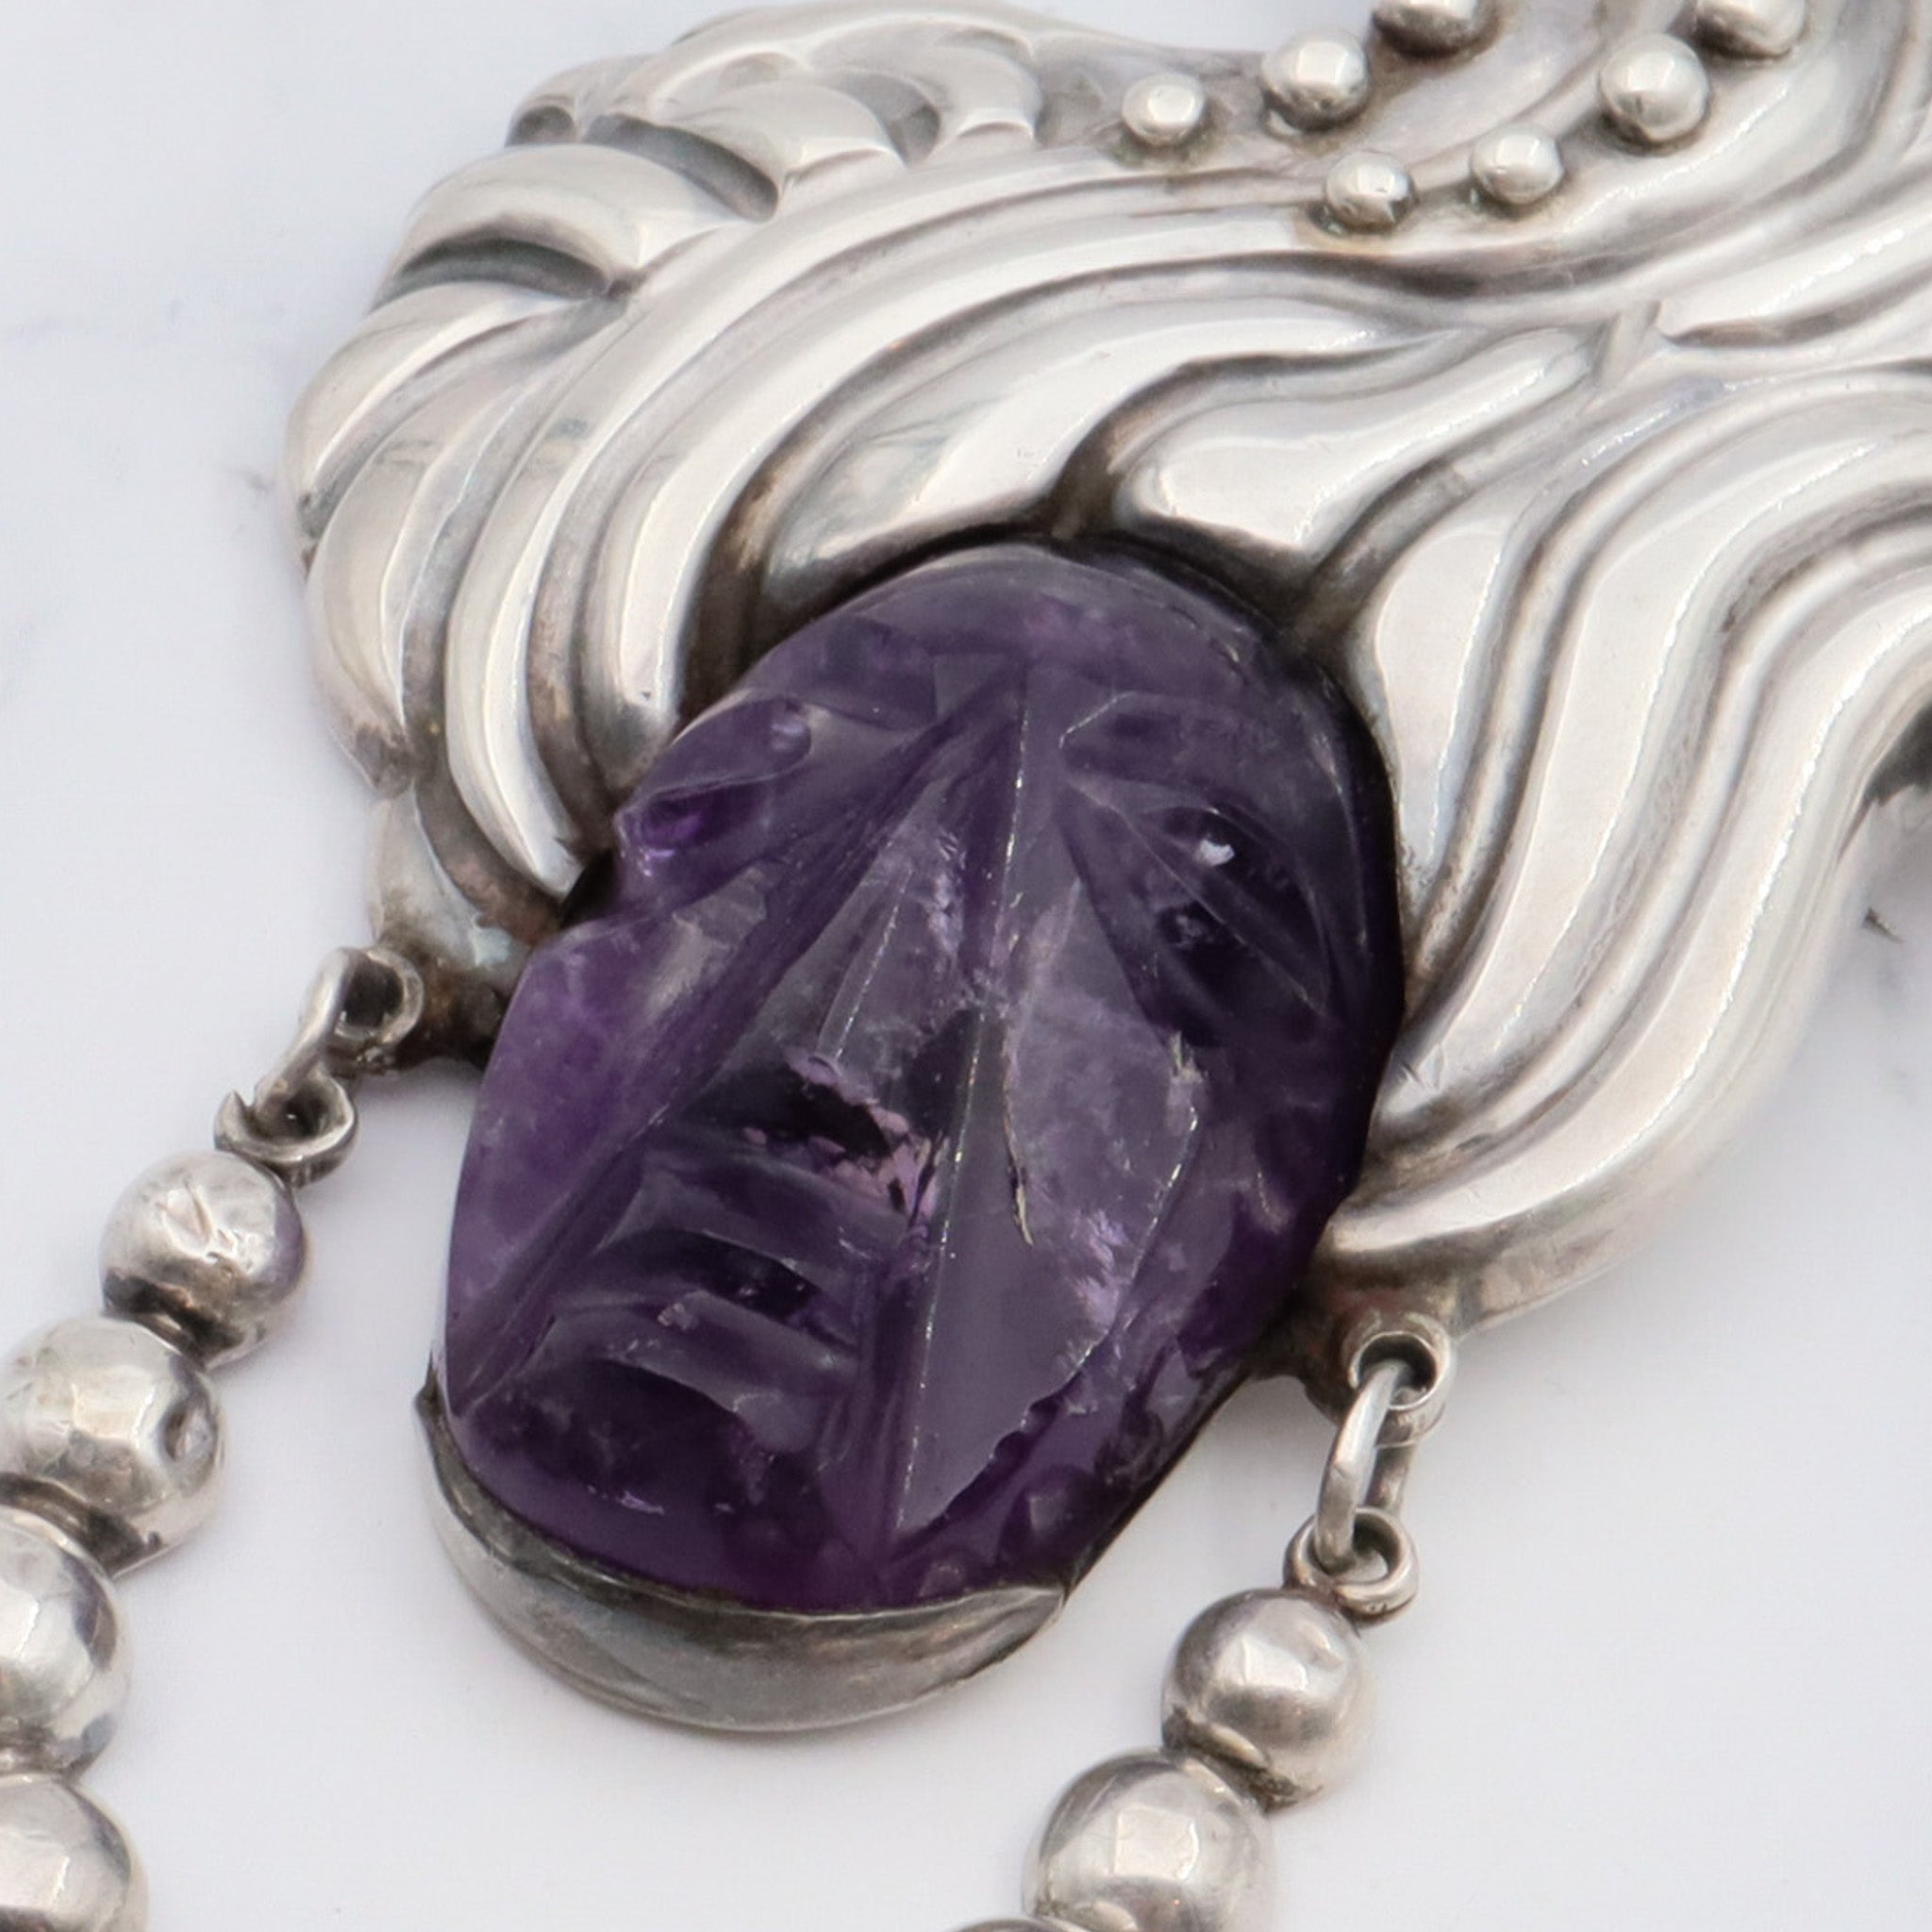 Amazing antique 1920's Mexican sterling silver carved amethyst warrior goddess brooch